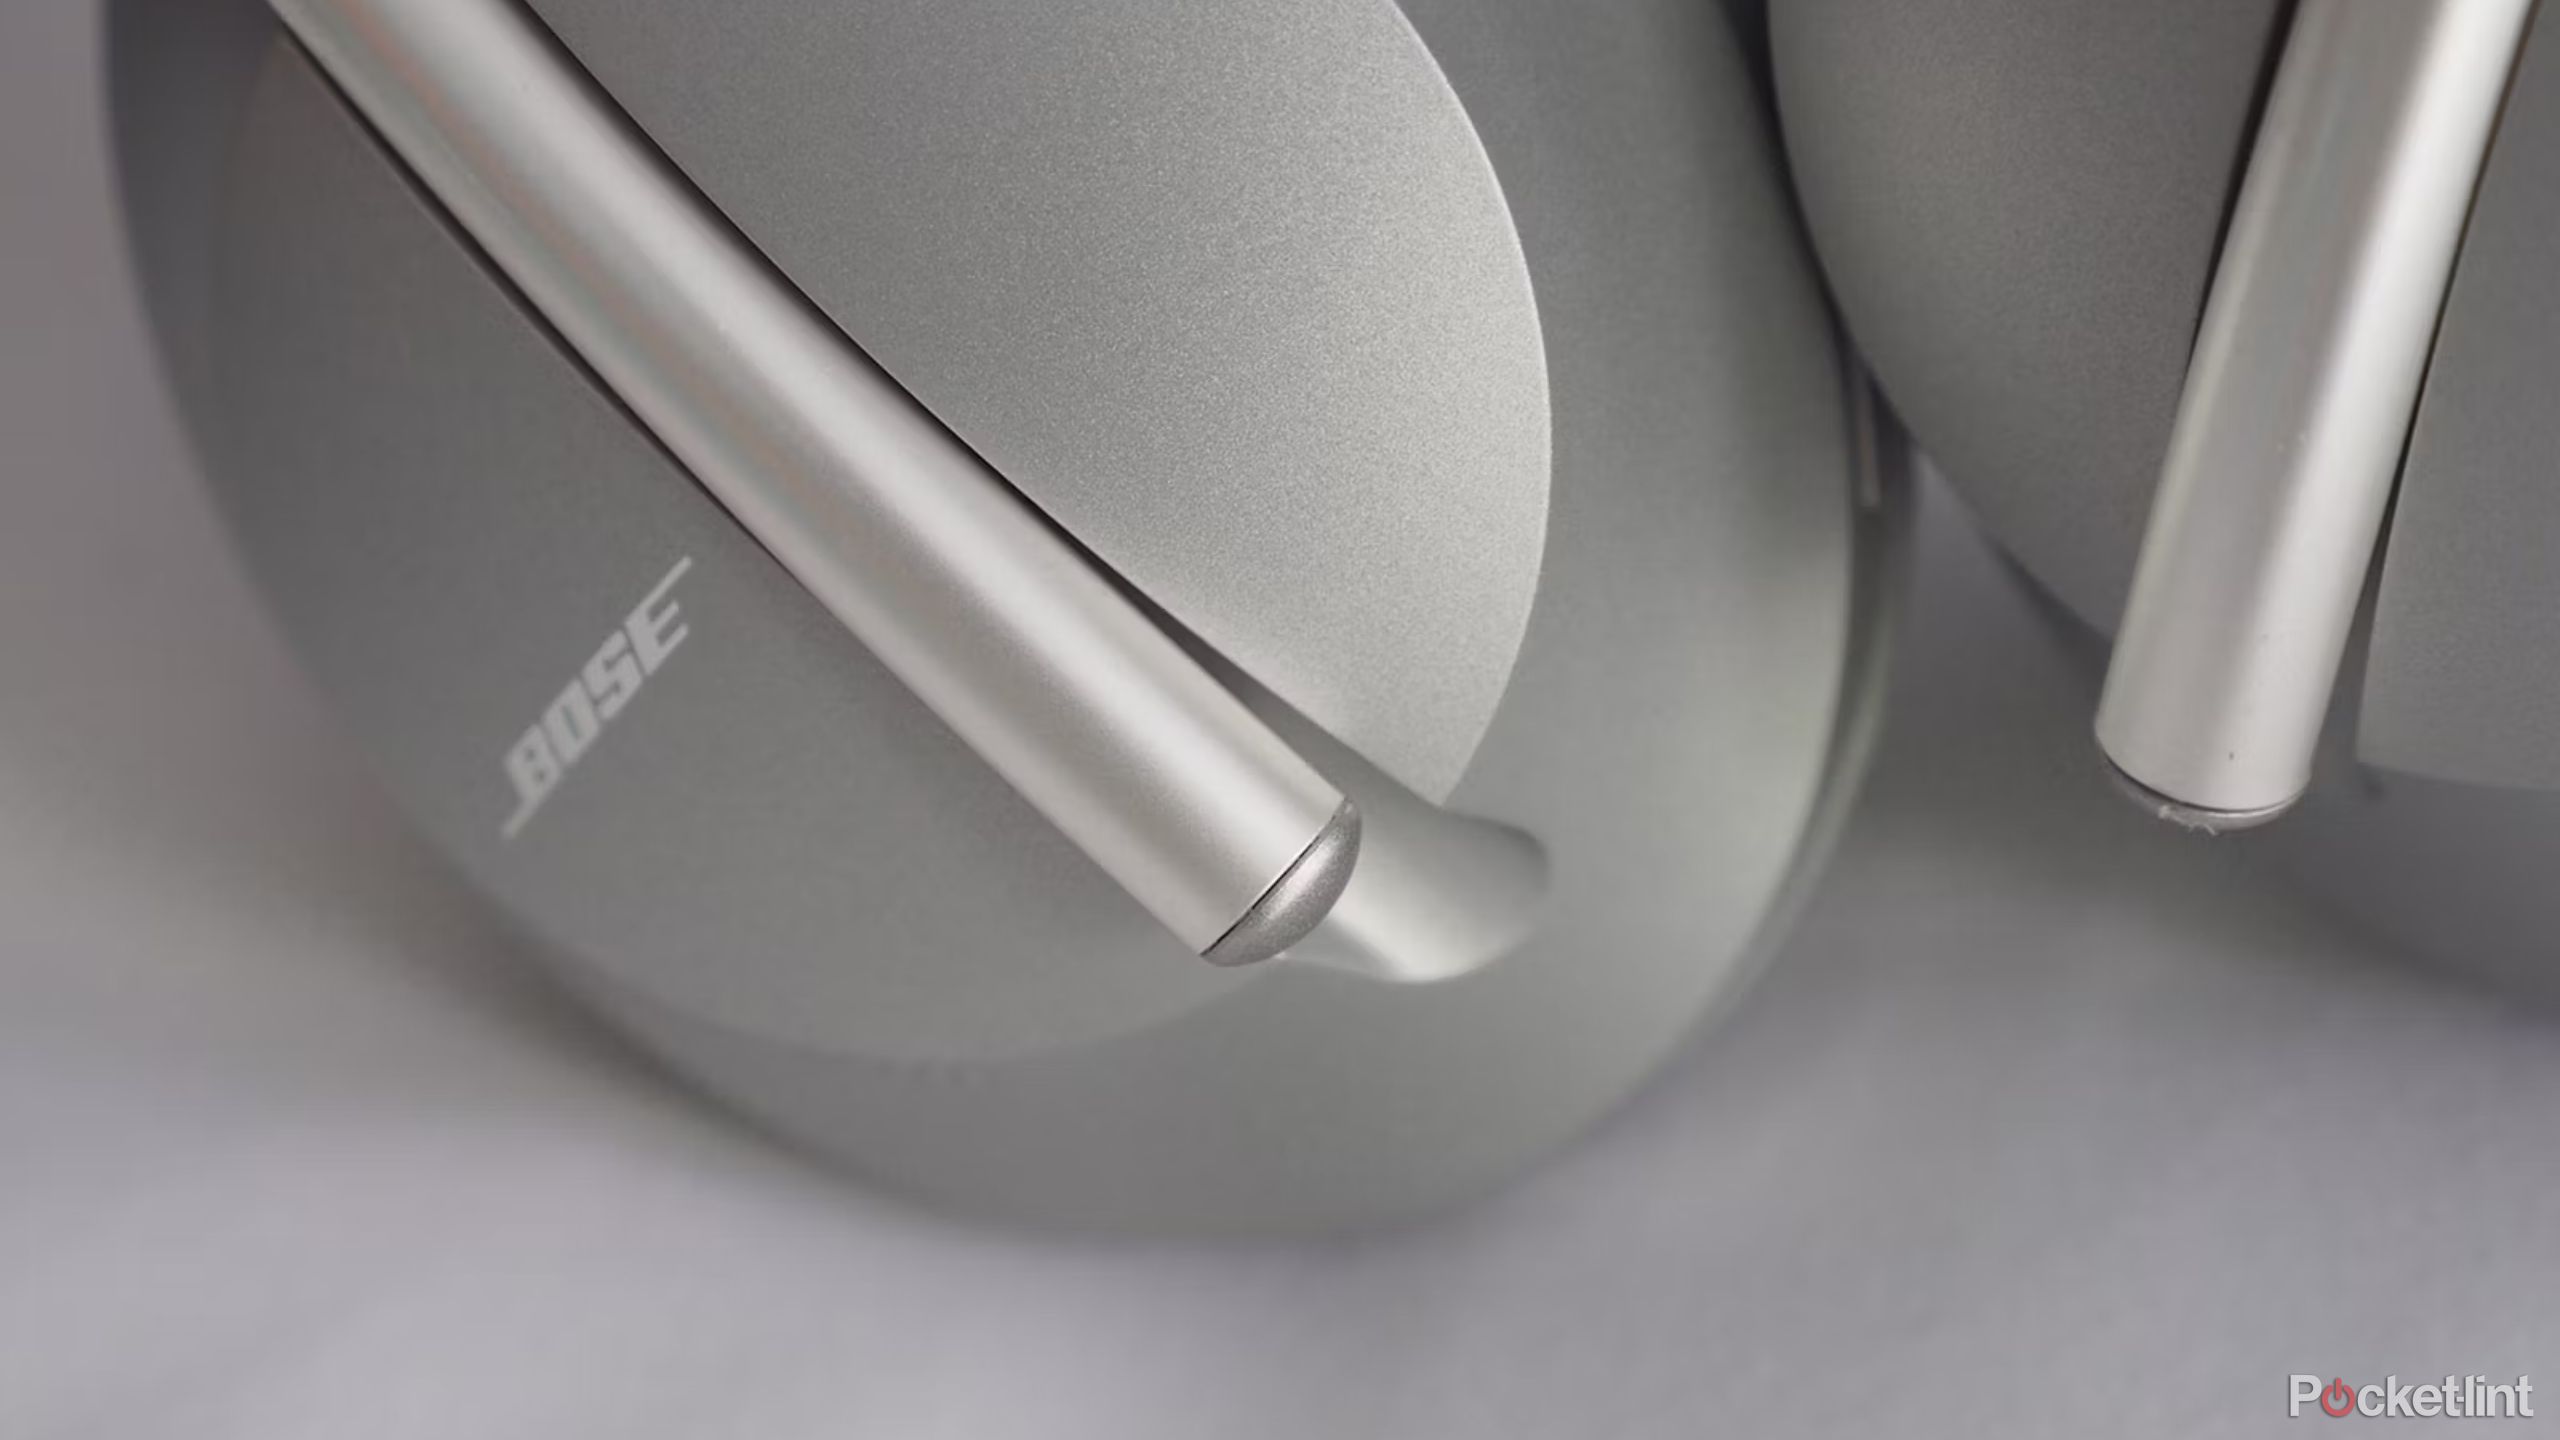 Bose NCH 700 in silver. 